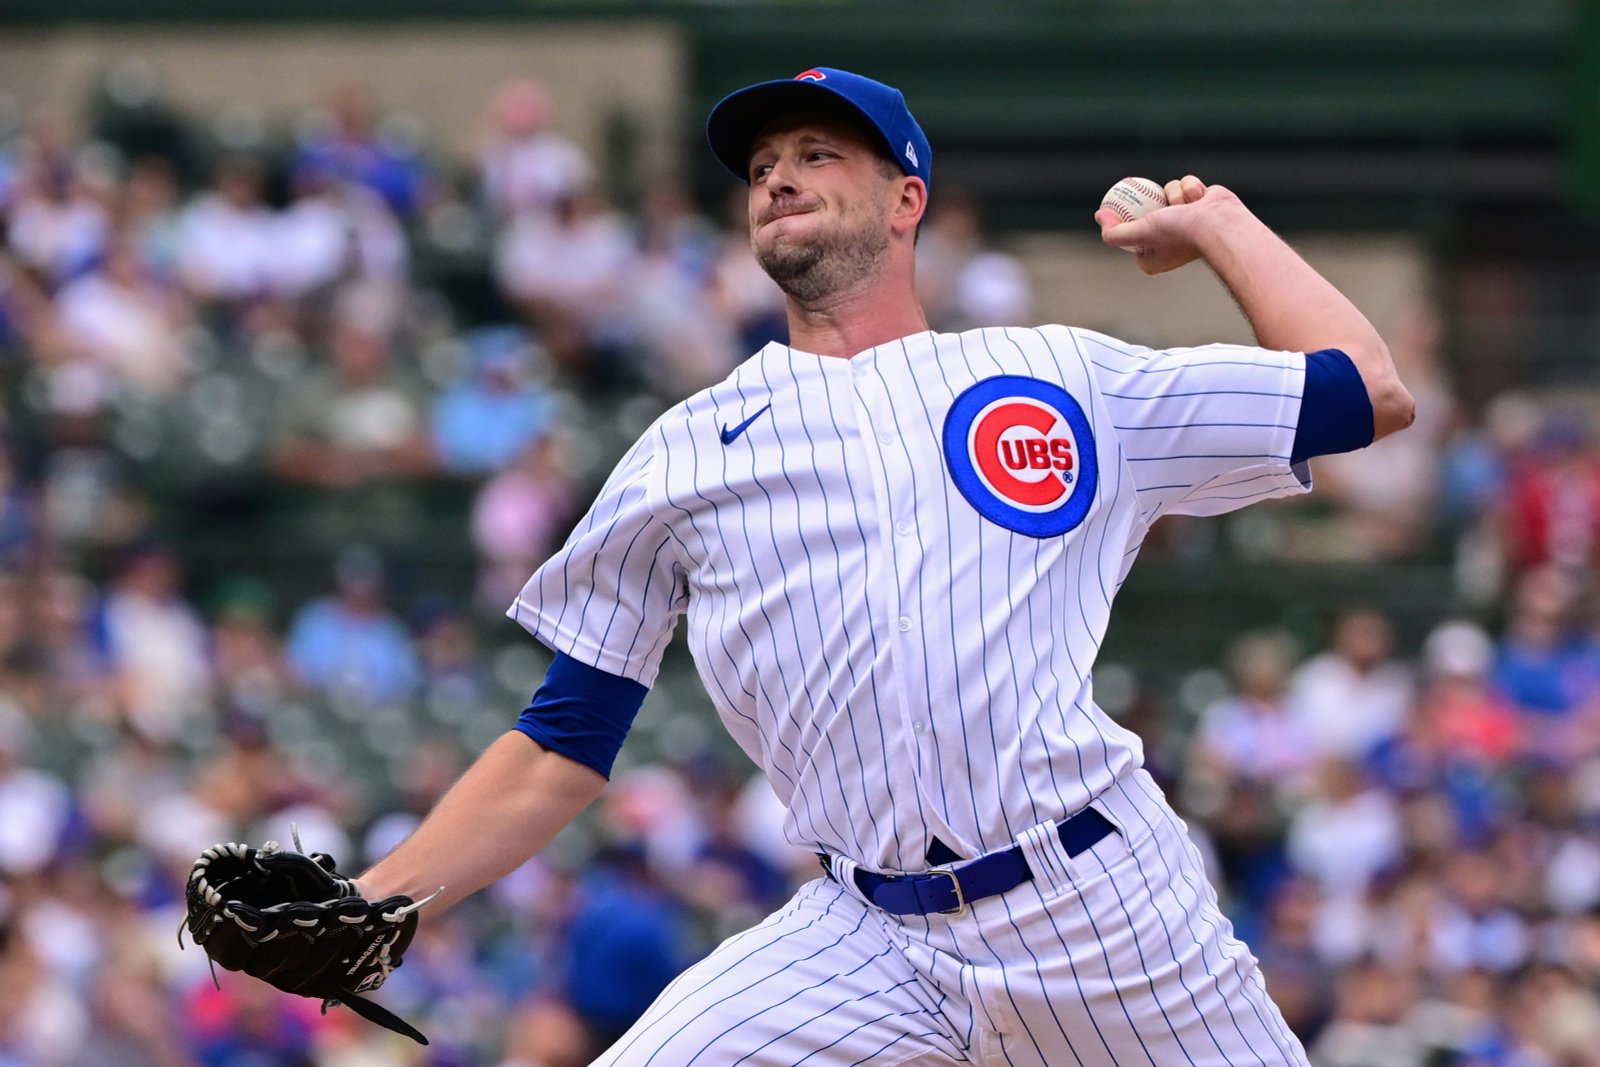 Starting pitcher Drew Smyly #11 of the Chicago Cubs